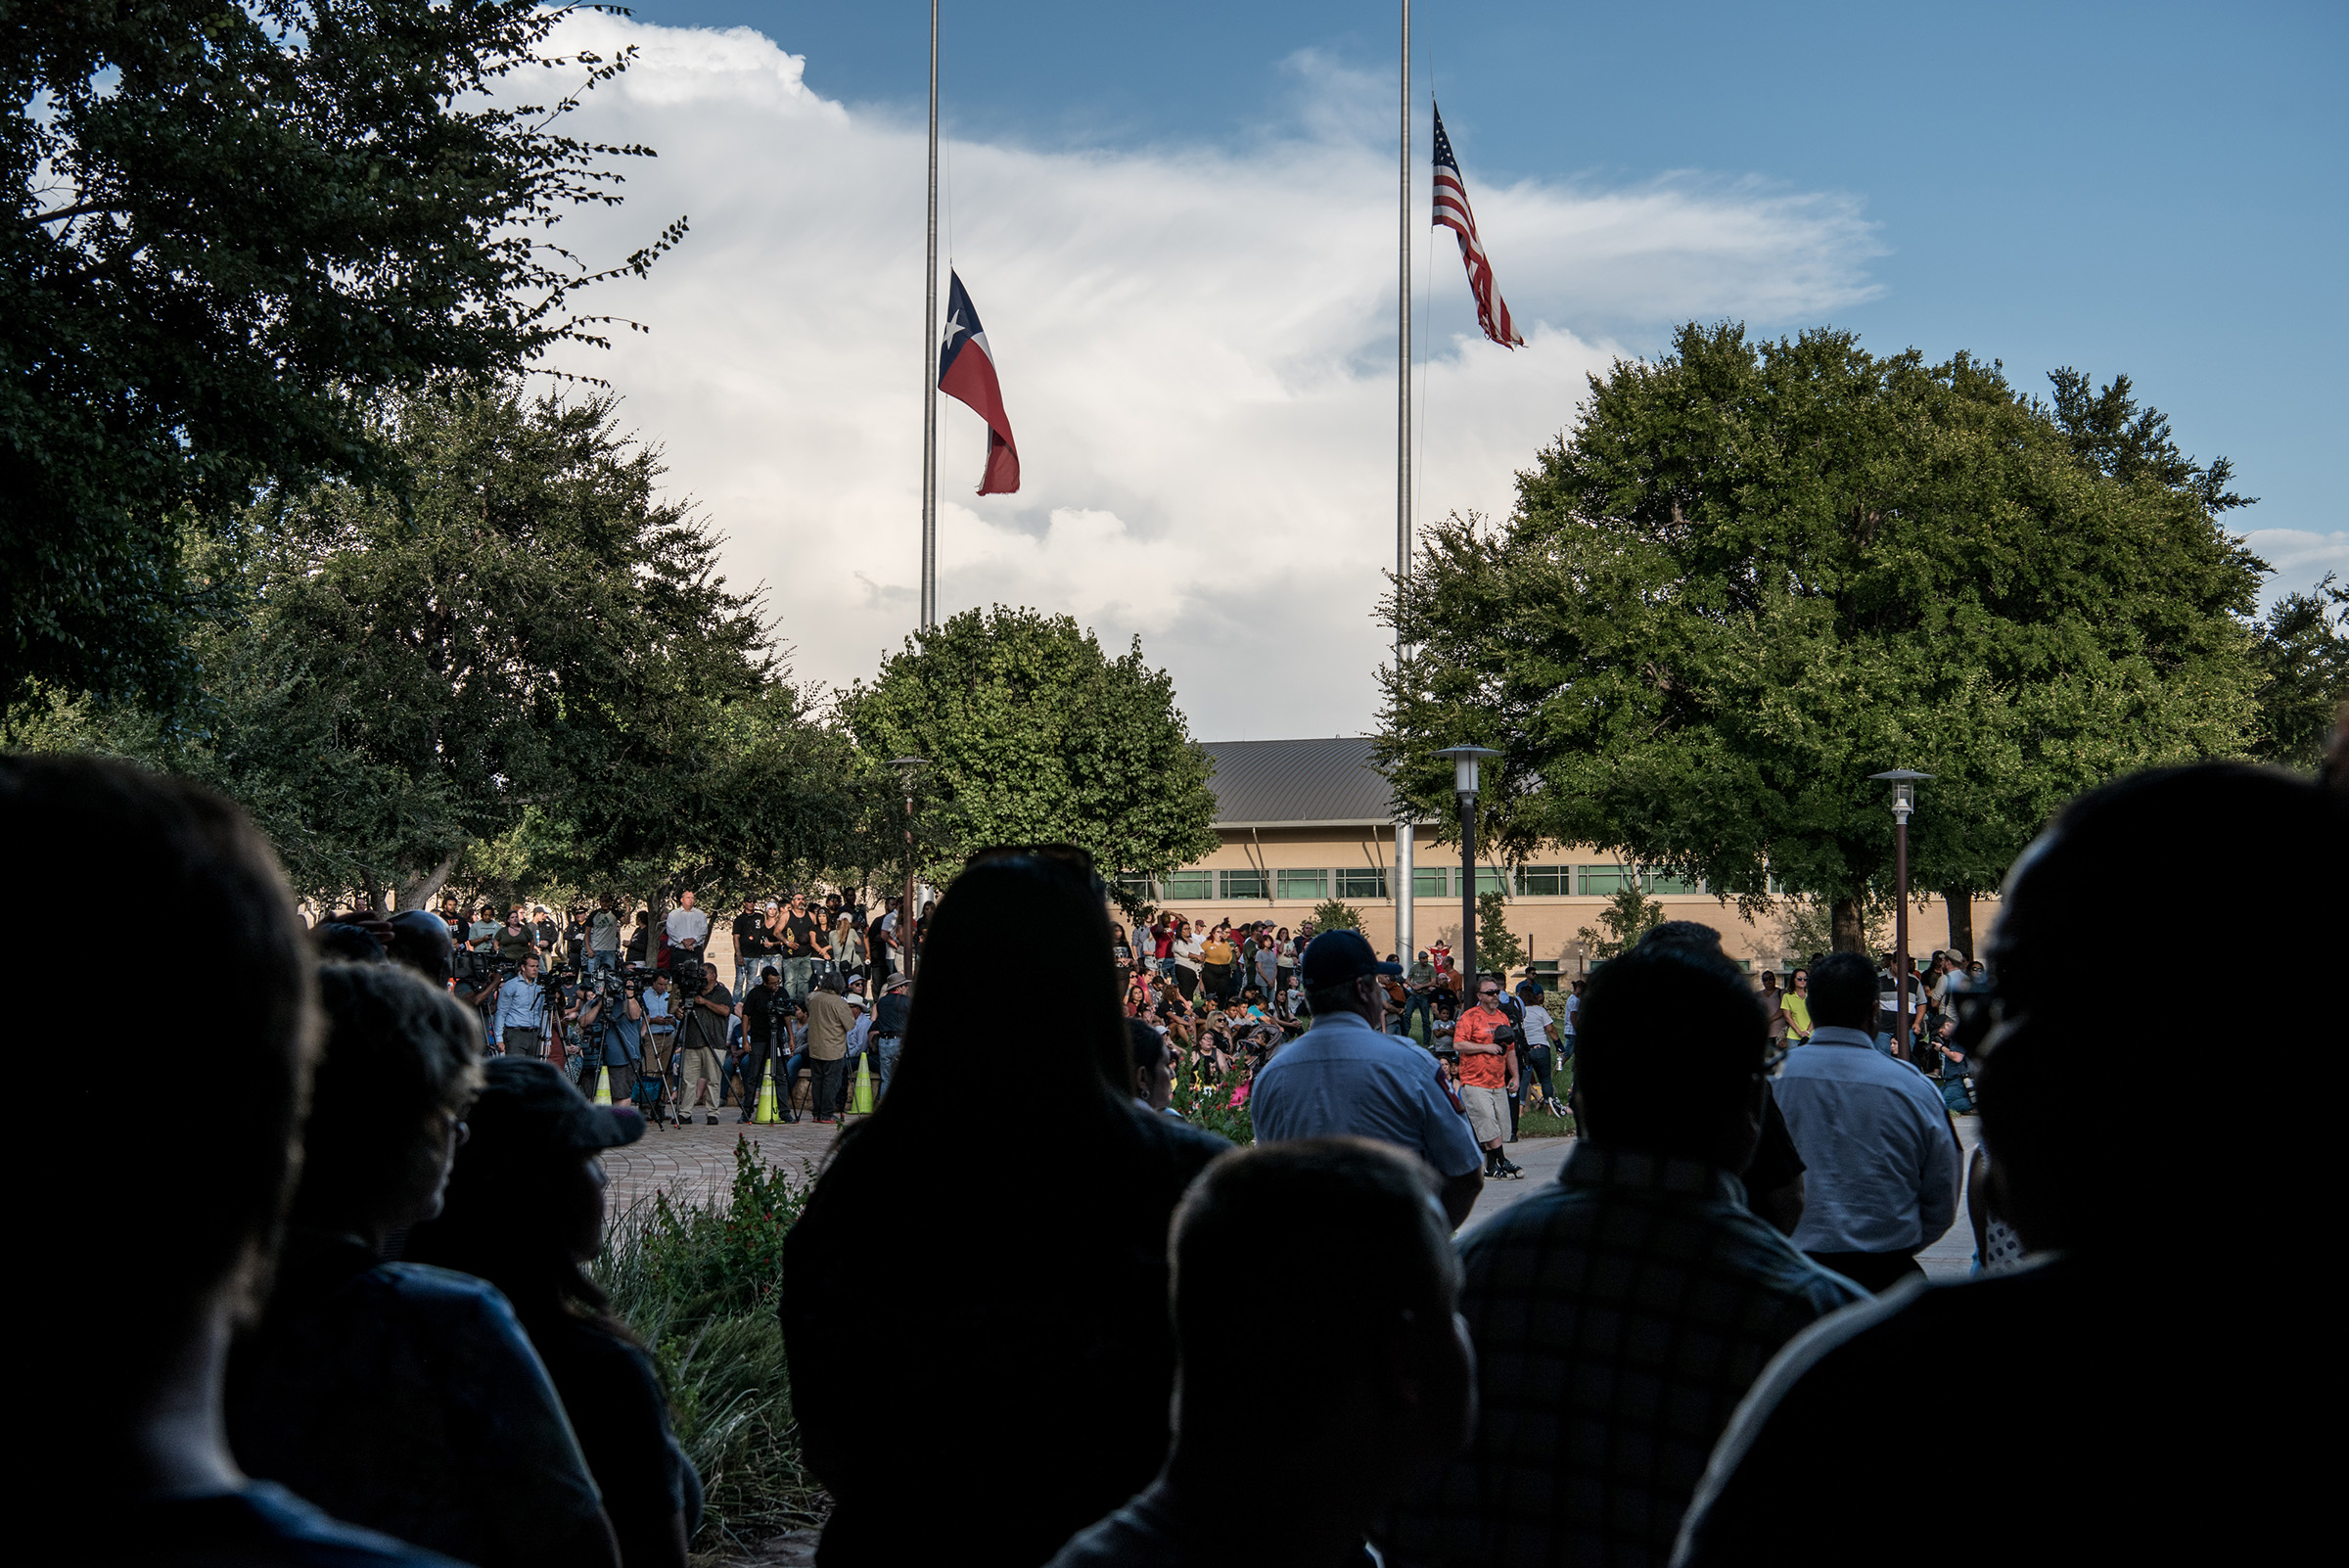 Flags fly at half mast over a prayer vigil at the University of Texas of the Permian Basin for the victims of a mass shooting in Odessa, TX, on Sept. 1, 2019. (Cengiz Yar—Getty Images)